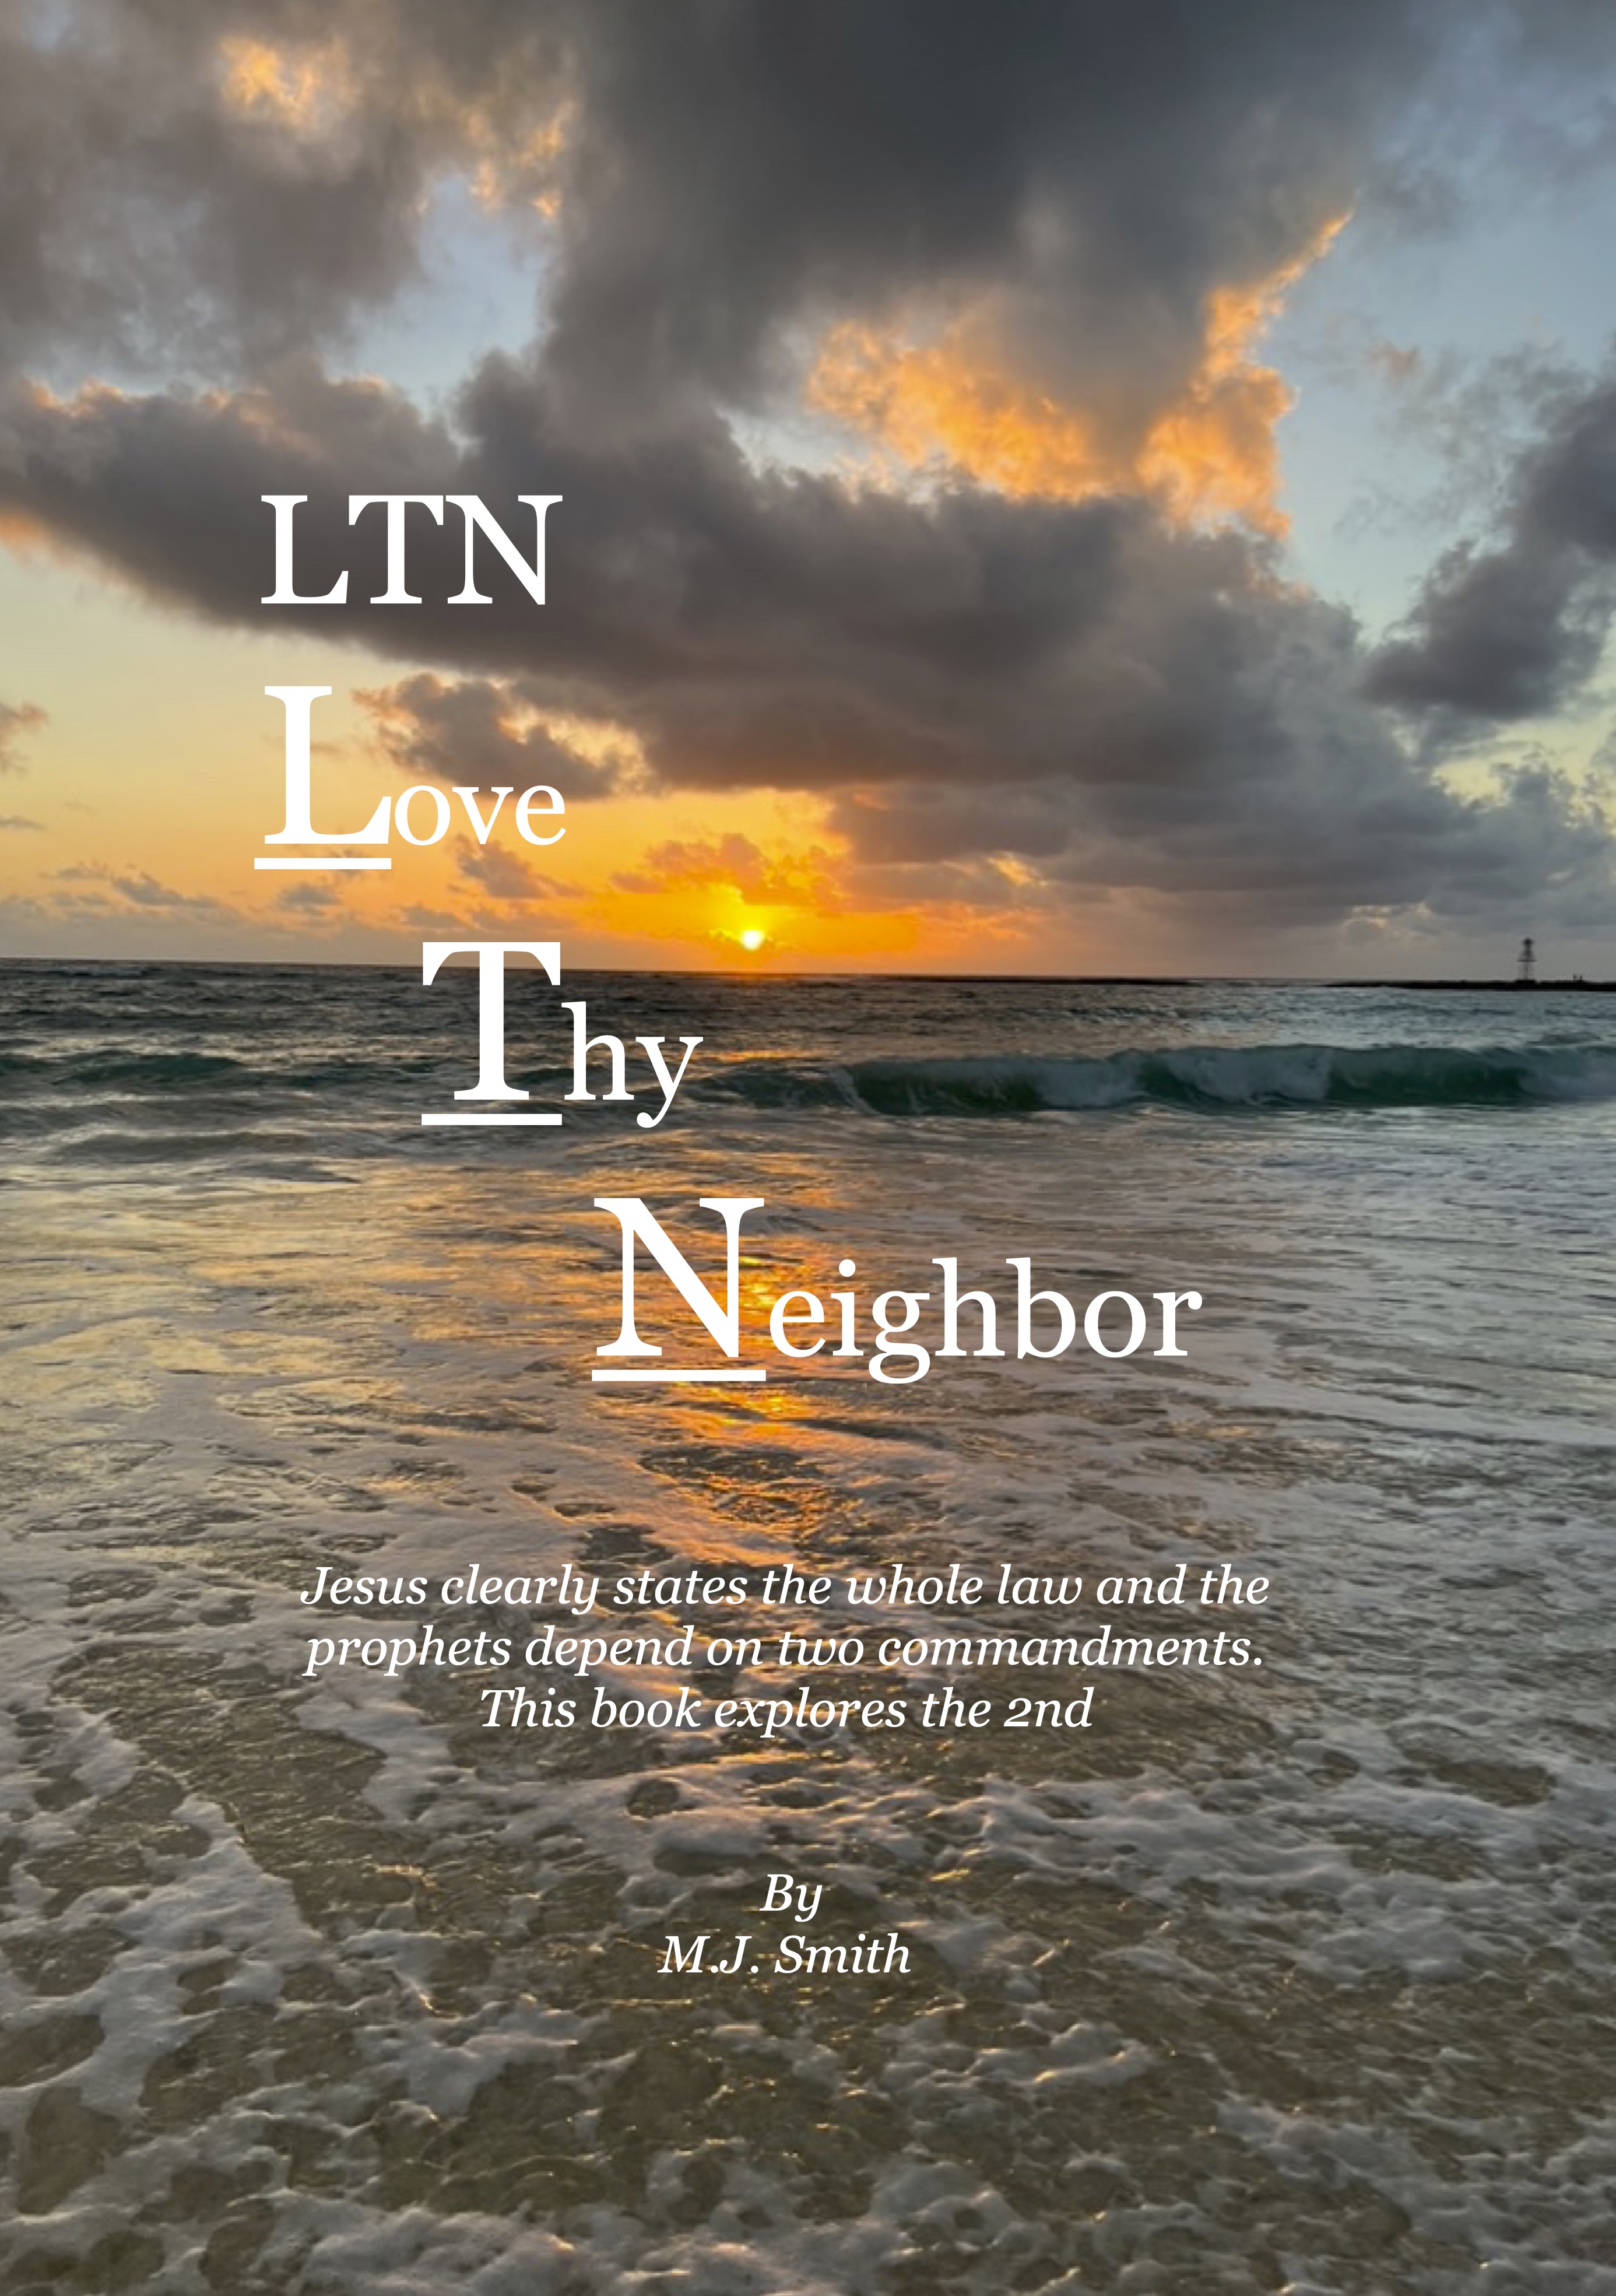 Does Anyone LTN (Love Thy Neighbor) Anymore? New Book by MJ Smith